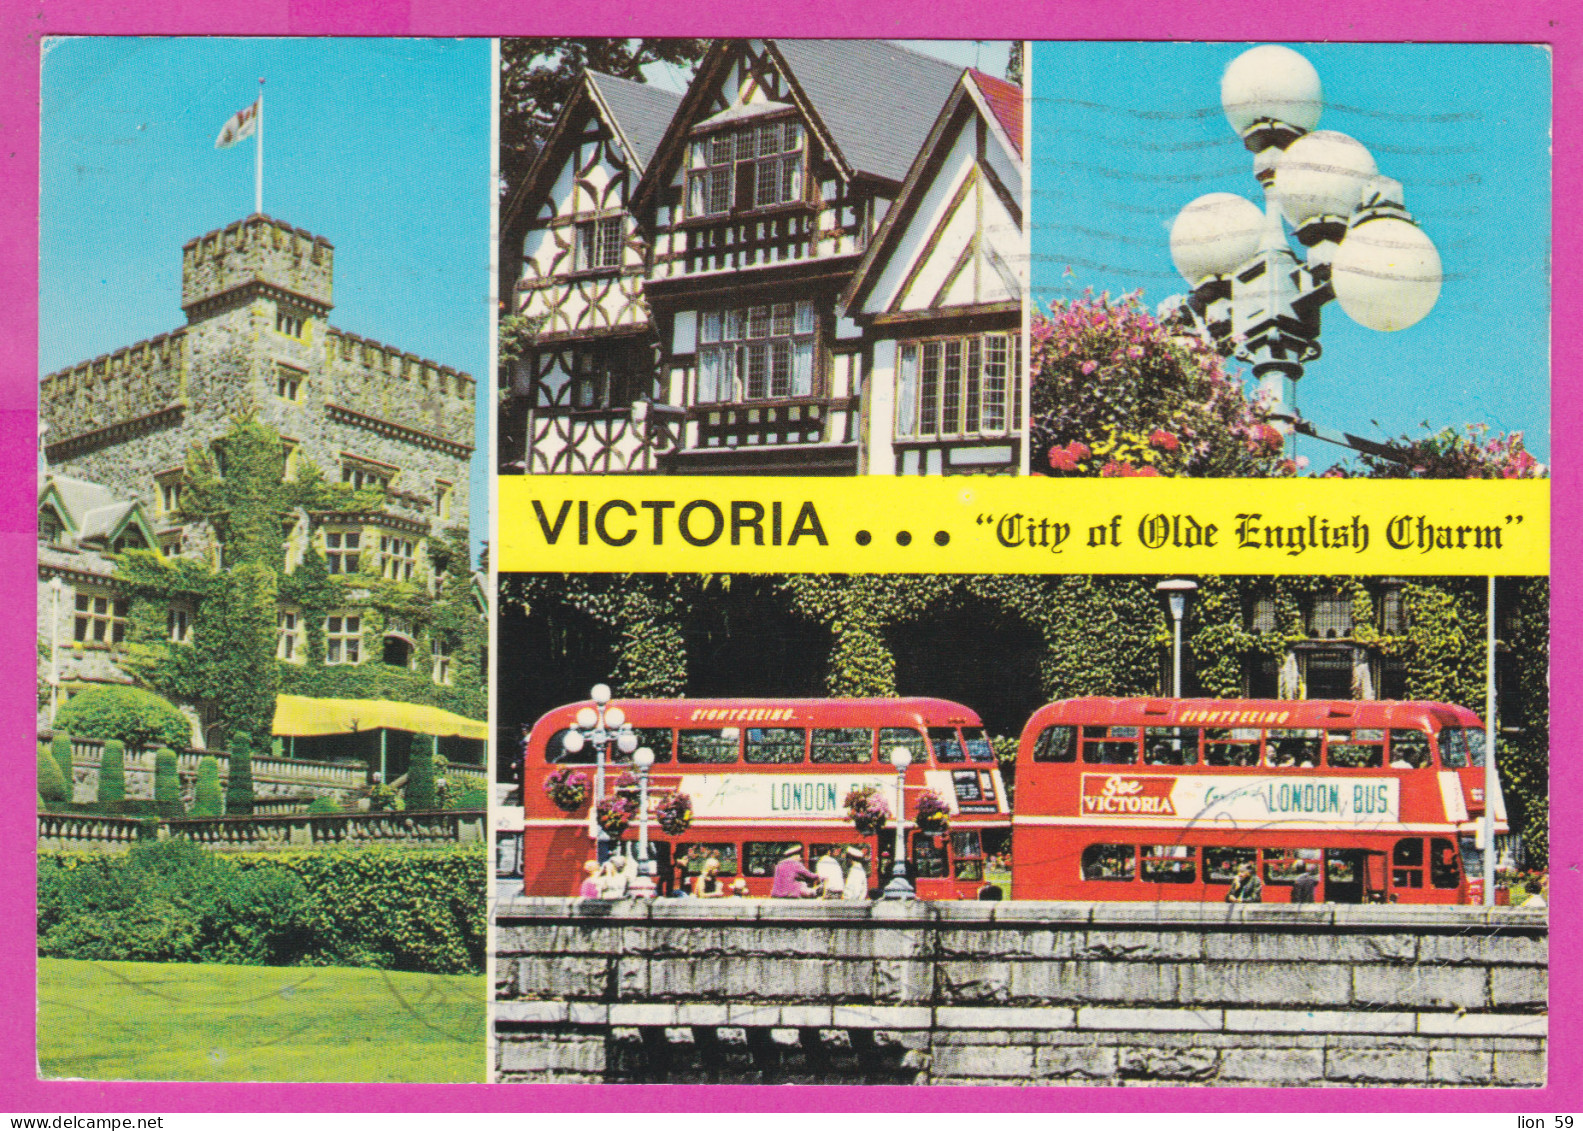 292470 / Canada Victoria "City Of Olde English Charm" BUS PC USED (O)  Vancouver 1972 - 15 C. Greenland Mountains - Victoria